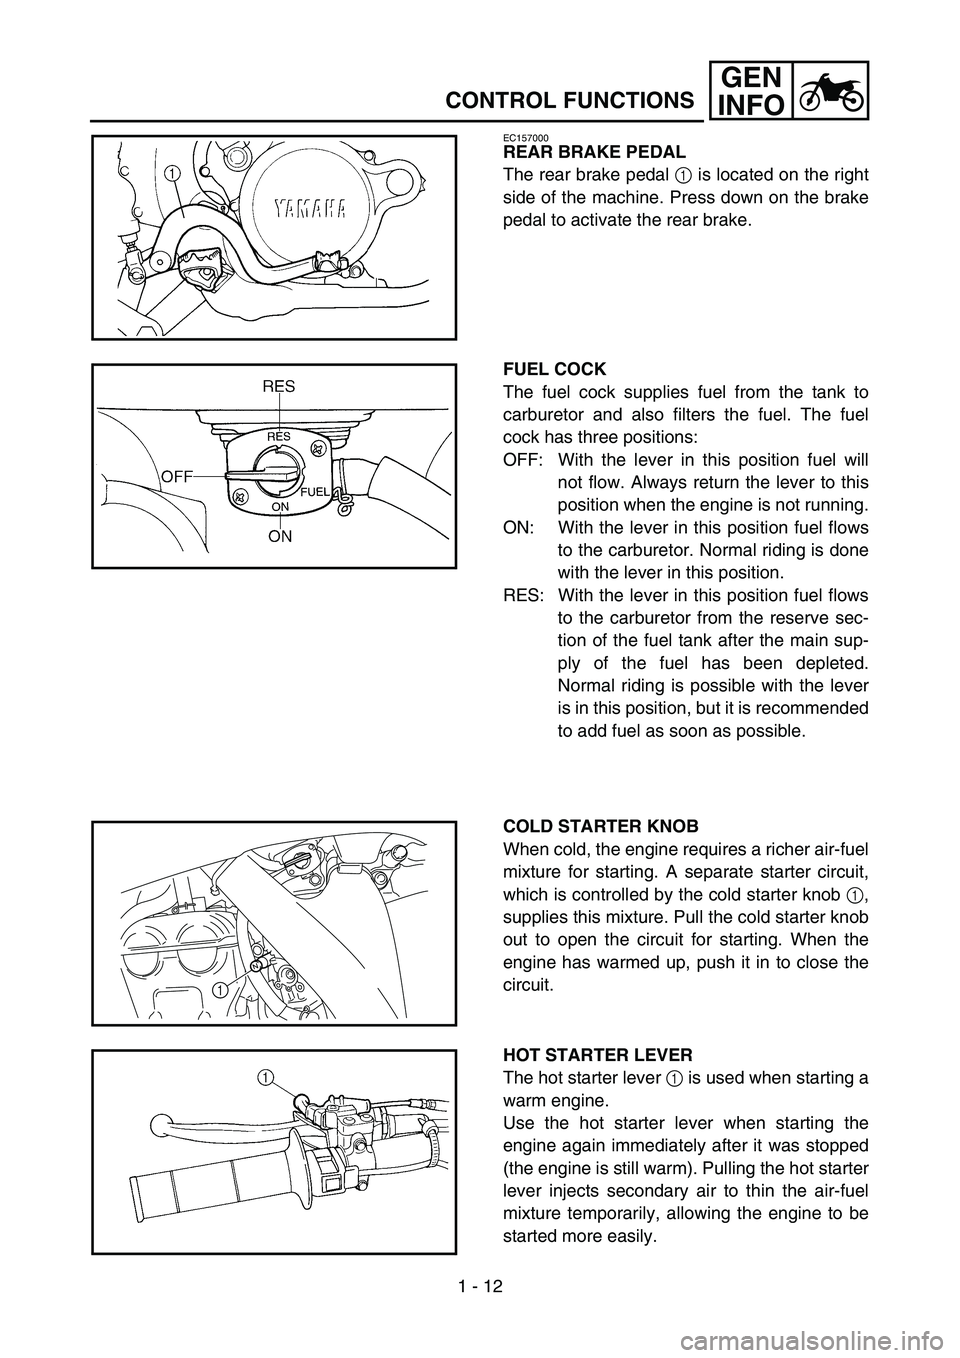 YAMAHA WR 450F 2007  Owners Manual 1 - 12
GEN
INFO
CONTROL FUNCTIONS
EC157000
REAR BRAKE PEDAL
The rear brake pedal 1 is located on the right
side of the machine. Press down on the brake
pedal to activate the rear brake.
FUEL COCK
The 